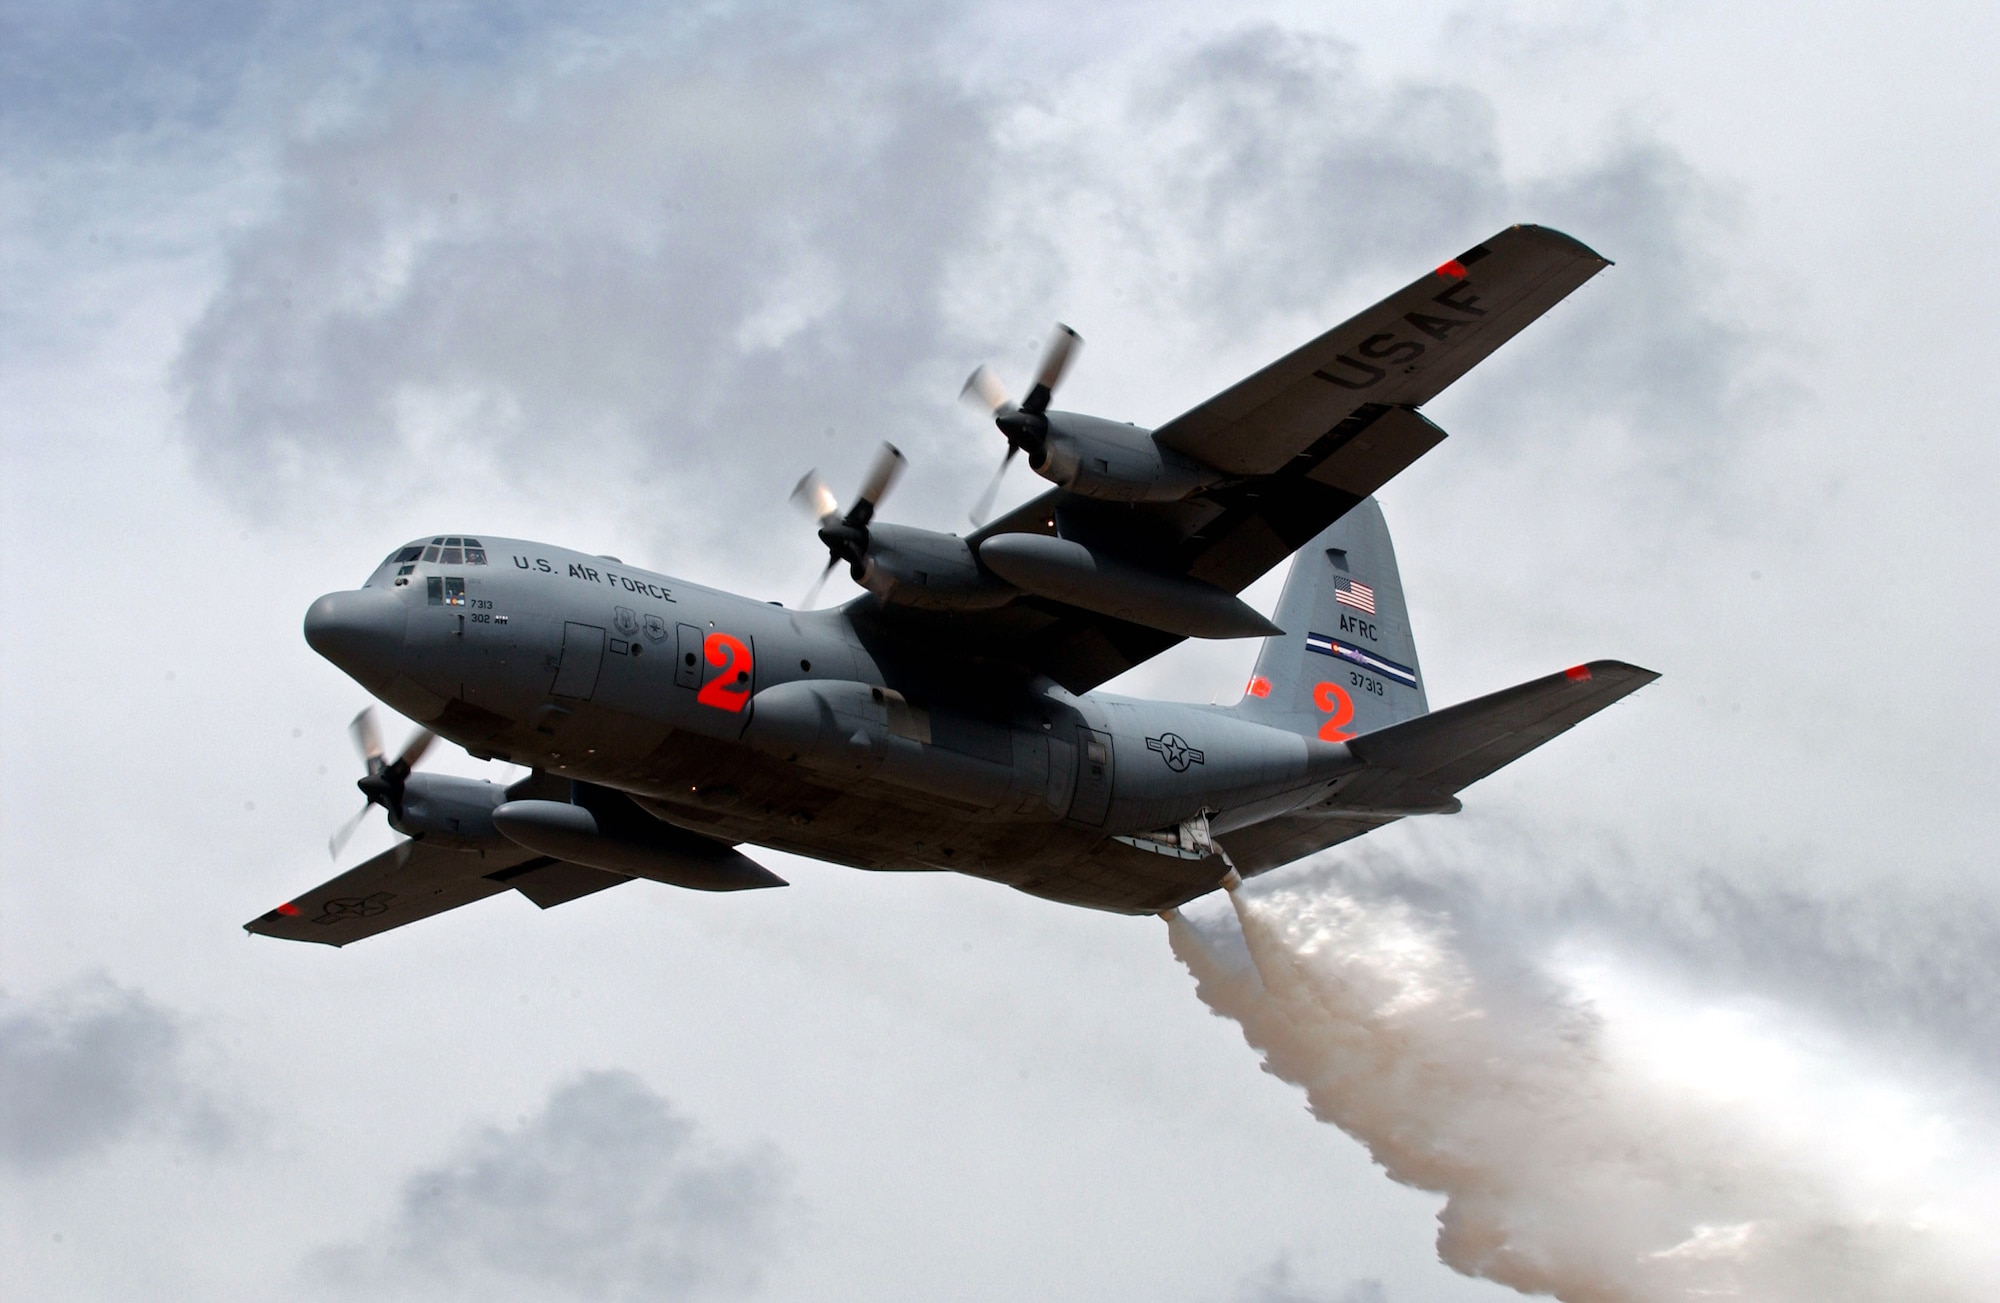 Two Air Force Reserve Command C-130 Hercules aircraft, equipped with Modular Airborne Firefighting Systems like this C-130 dropping water during annual MAFFS training in New Mexico, have been dispatched to help battle wildfires in California.  The aircraft are from the 302nd Airlift Wing at Peterson Air Force Base, Colo.  (U.S Air Force photo/Tech. Sgt. Rick Sforza)